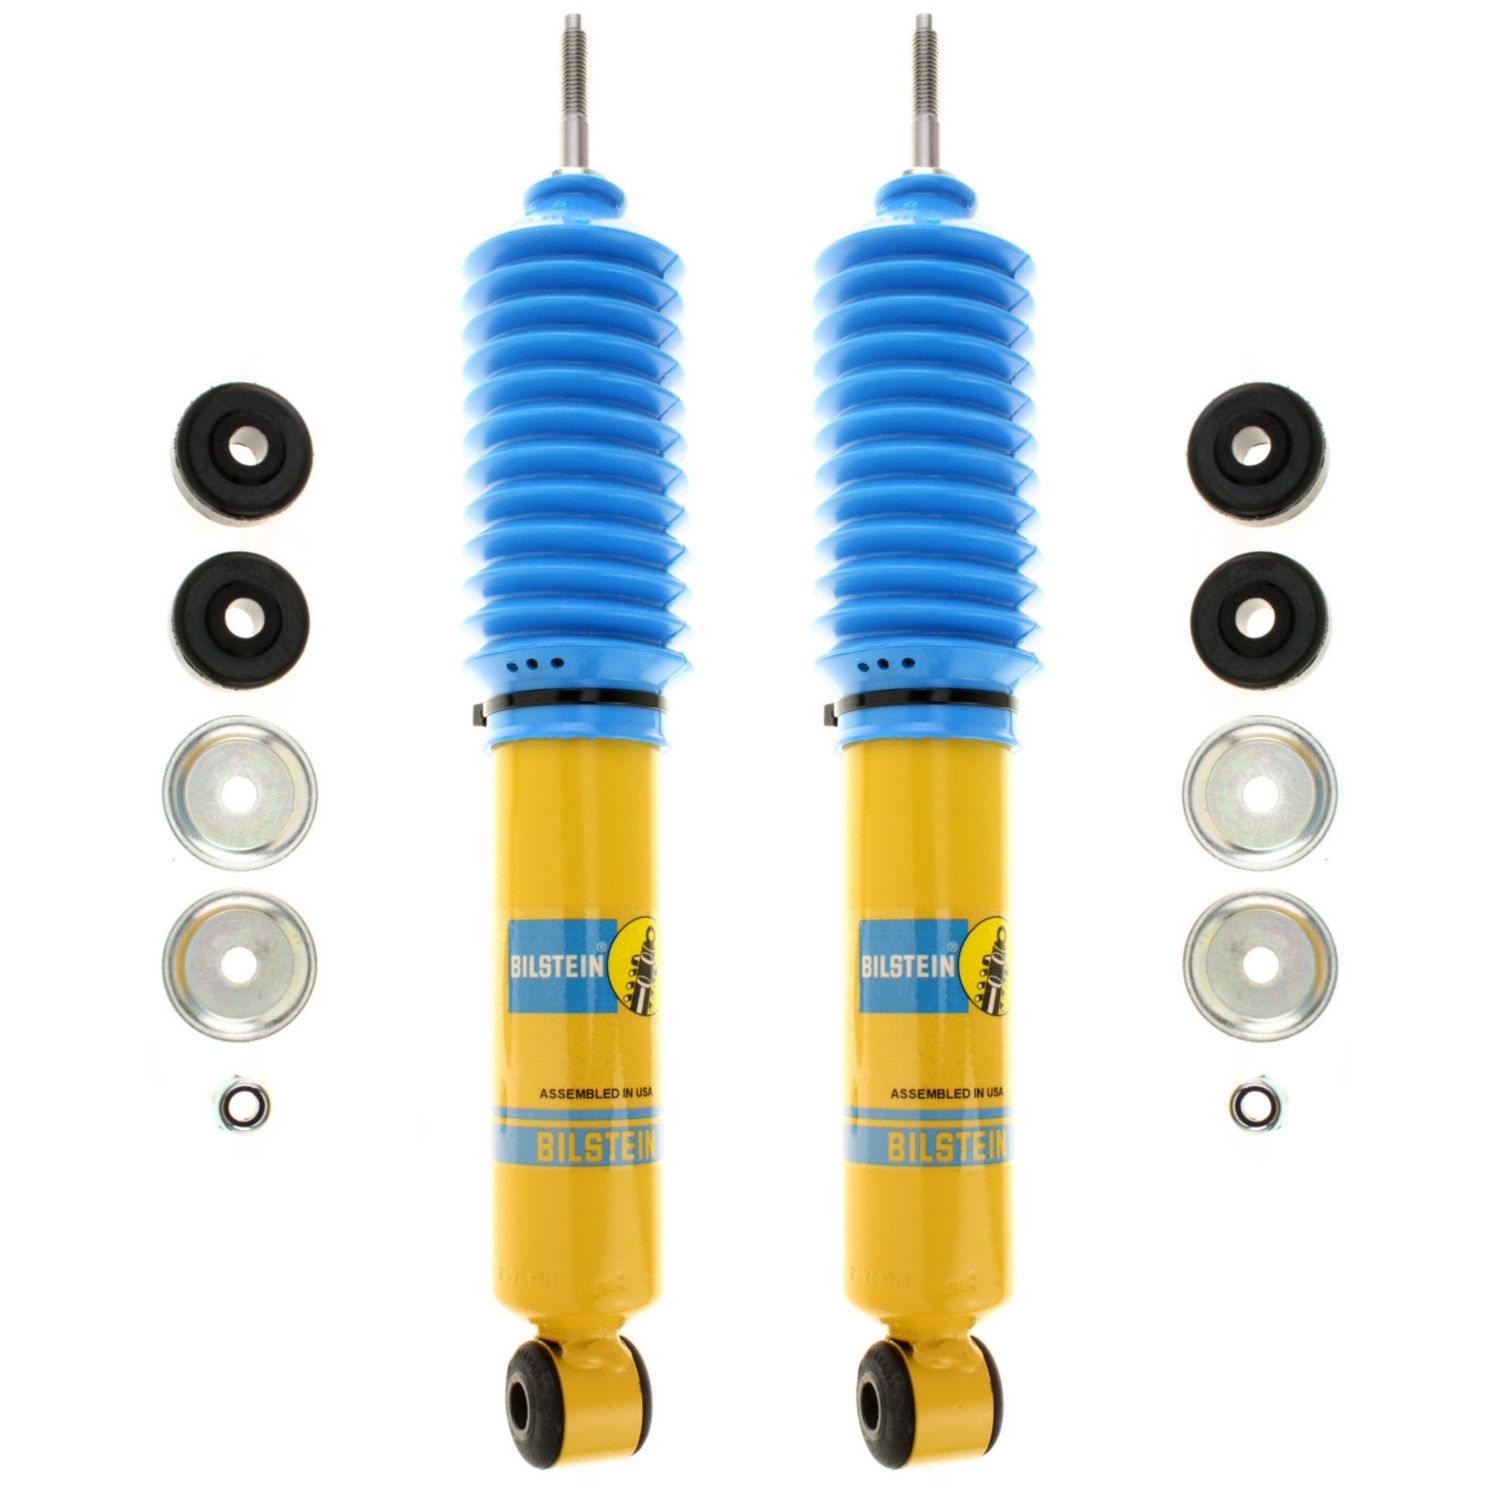 Bilstein B6 4600 Front shocks for 4WD Ford 99-`00 F-150 Kit 2